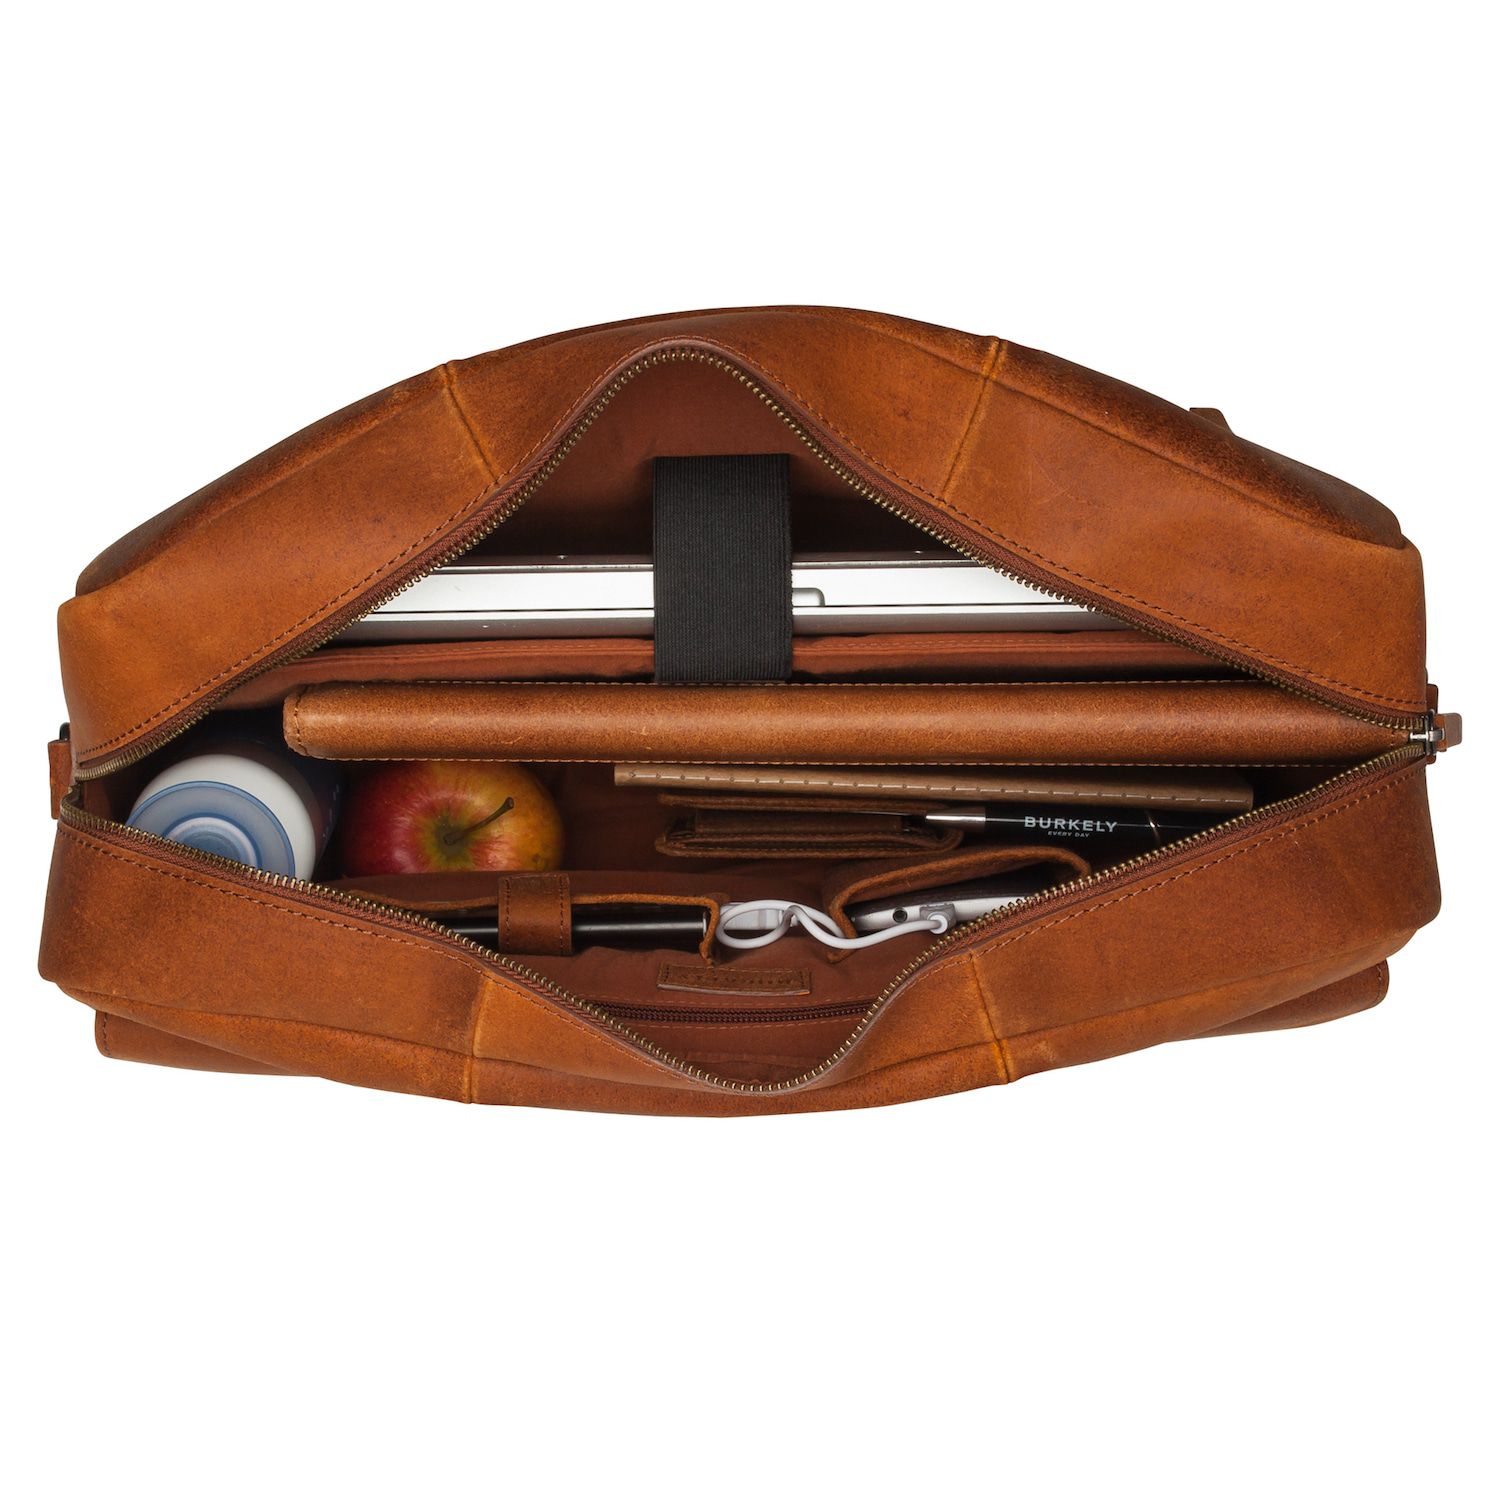 Burkely On The Move Laptopbag Flap Cognac 15 inch